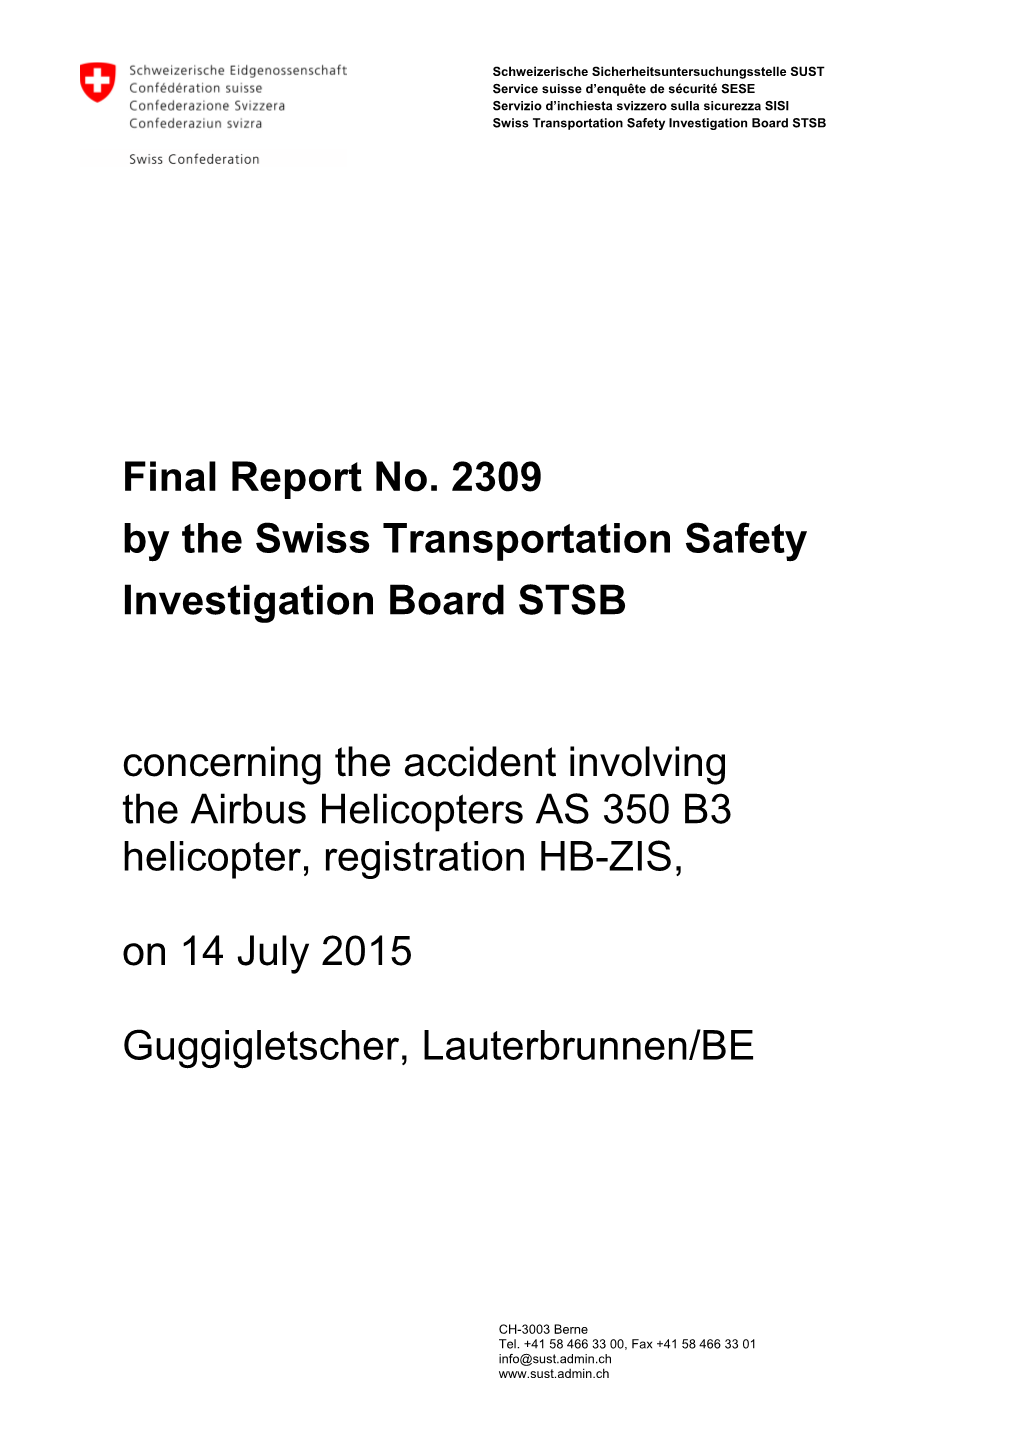 Final Report No. 2309 by the Swiss Transportation Safety Investigation Board STSB